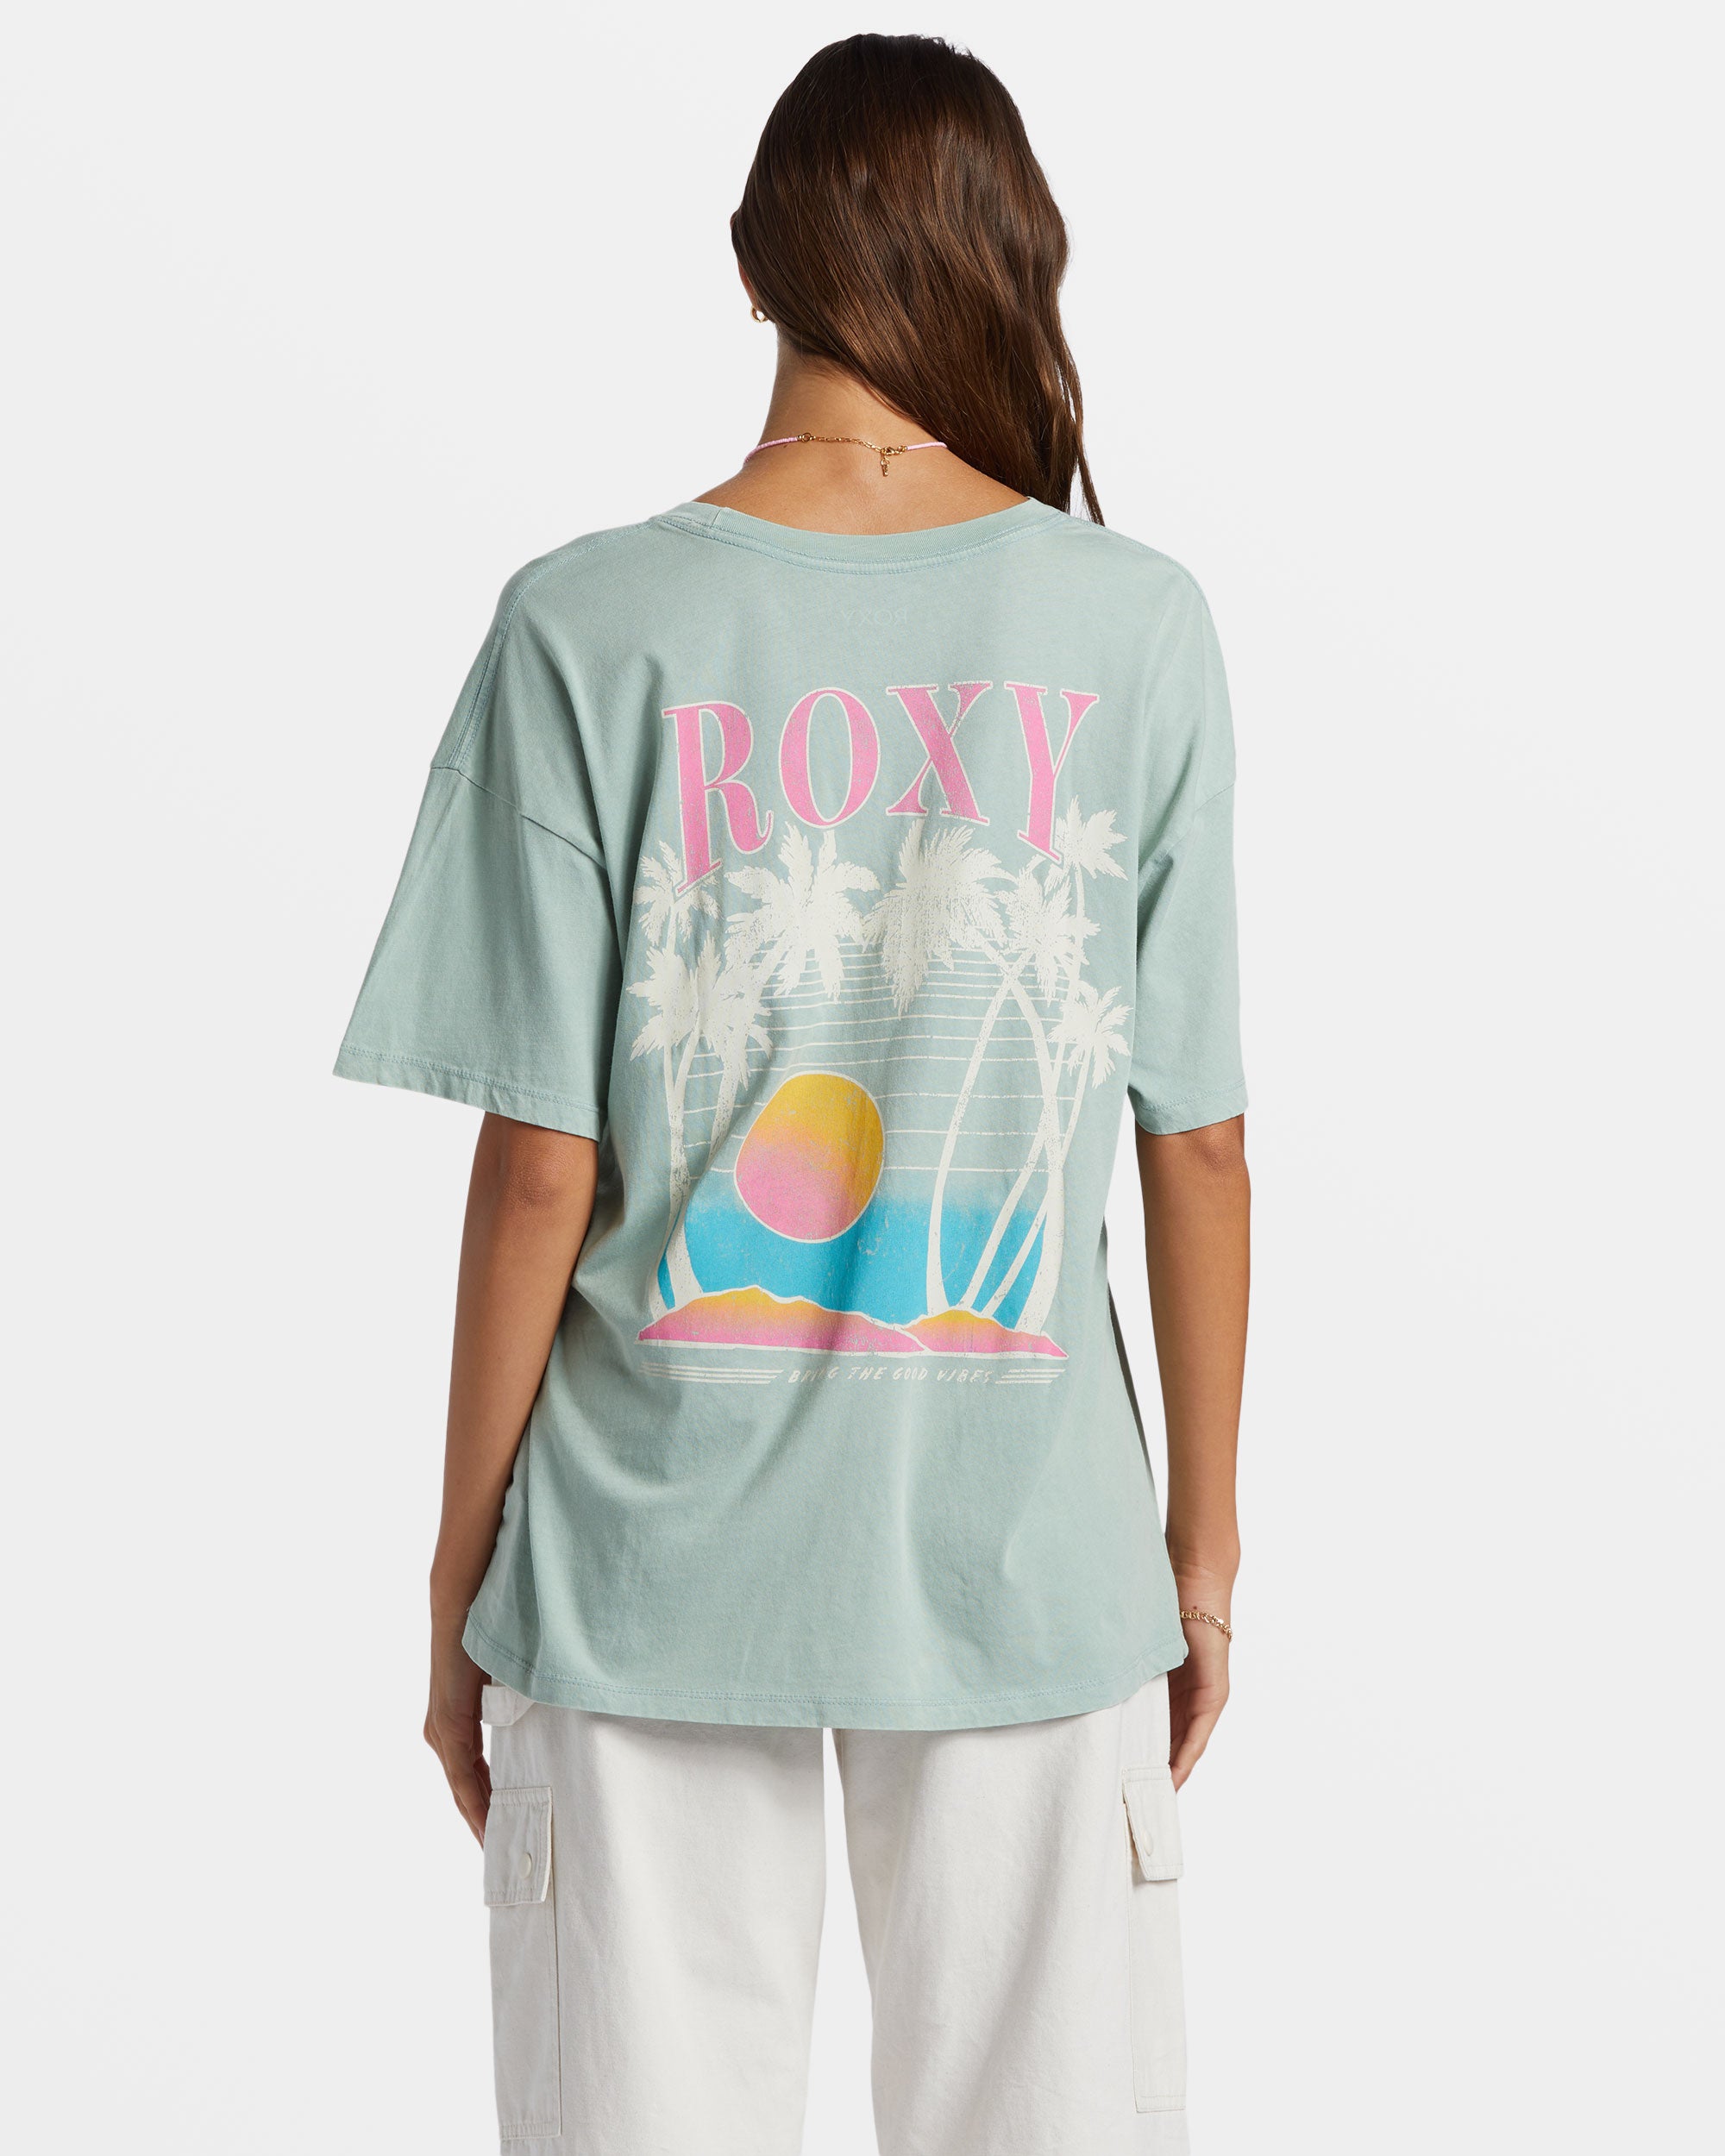 Bring The Good Vibes Oversized T-Shirt - Blue Surf